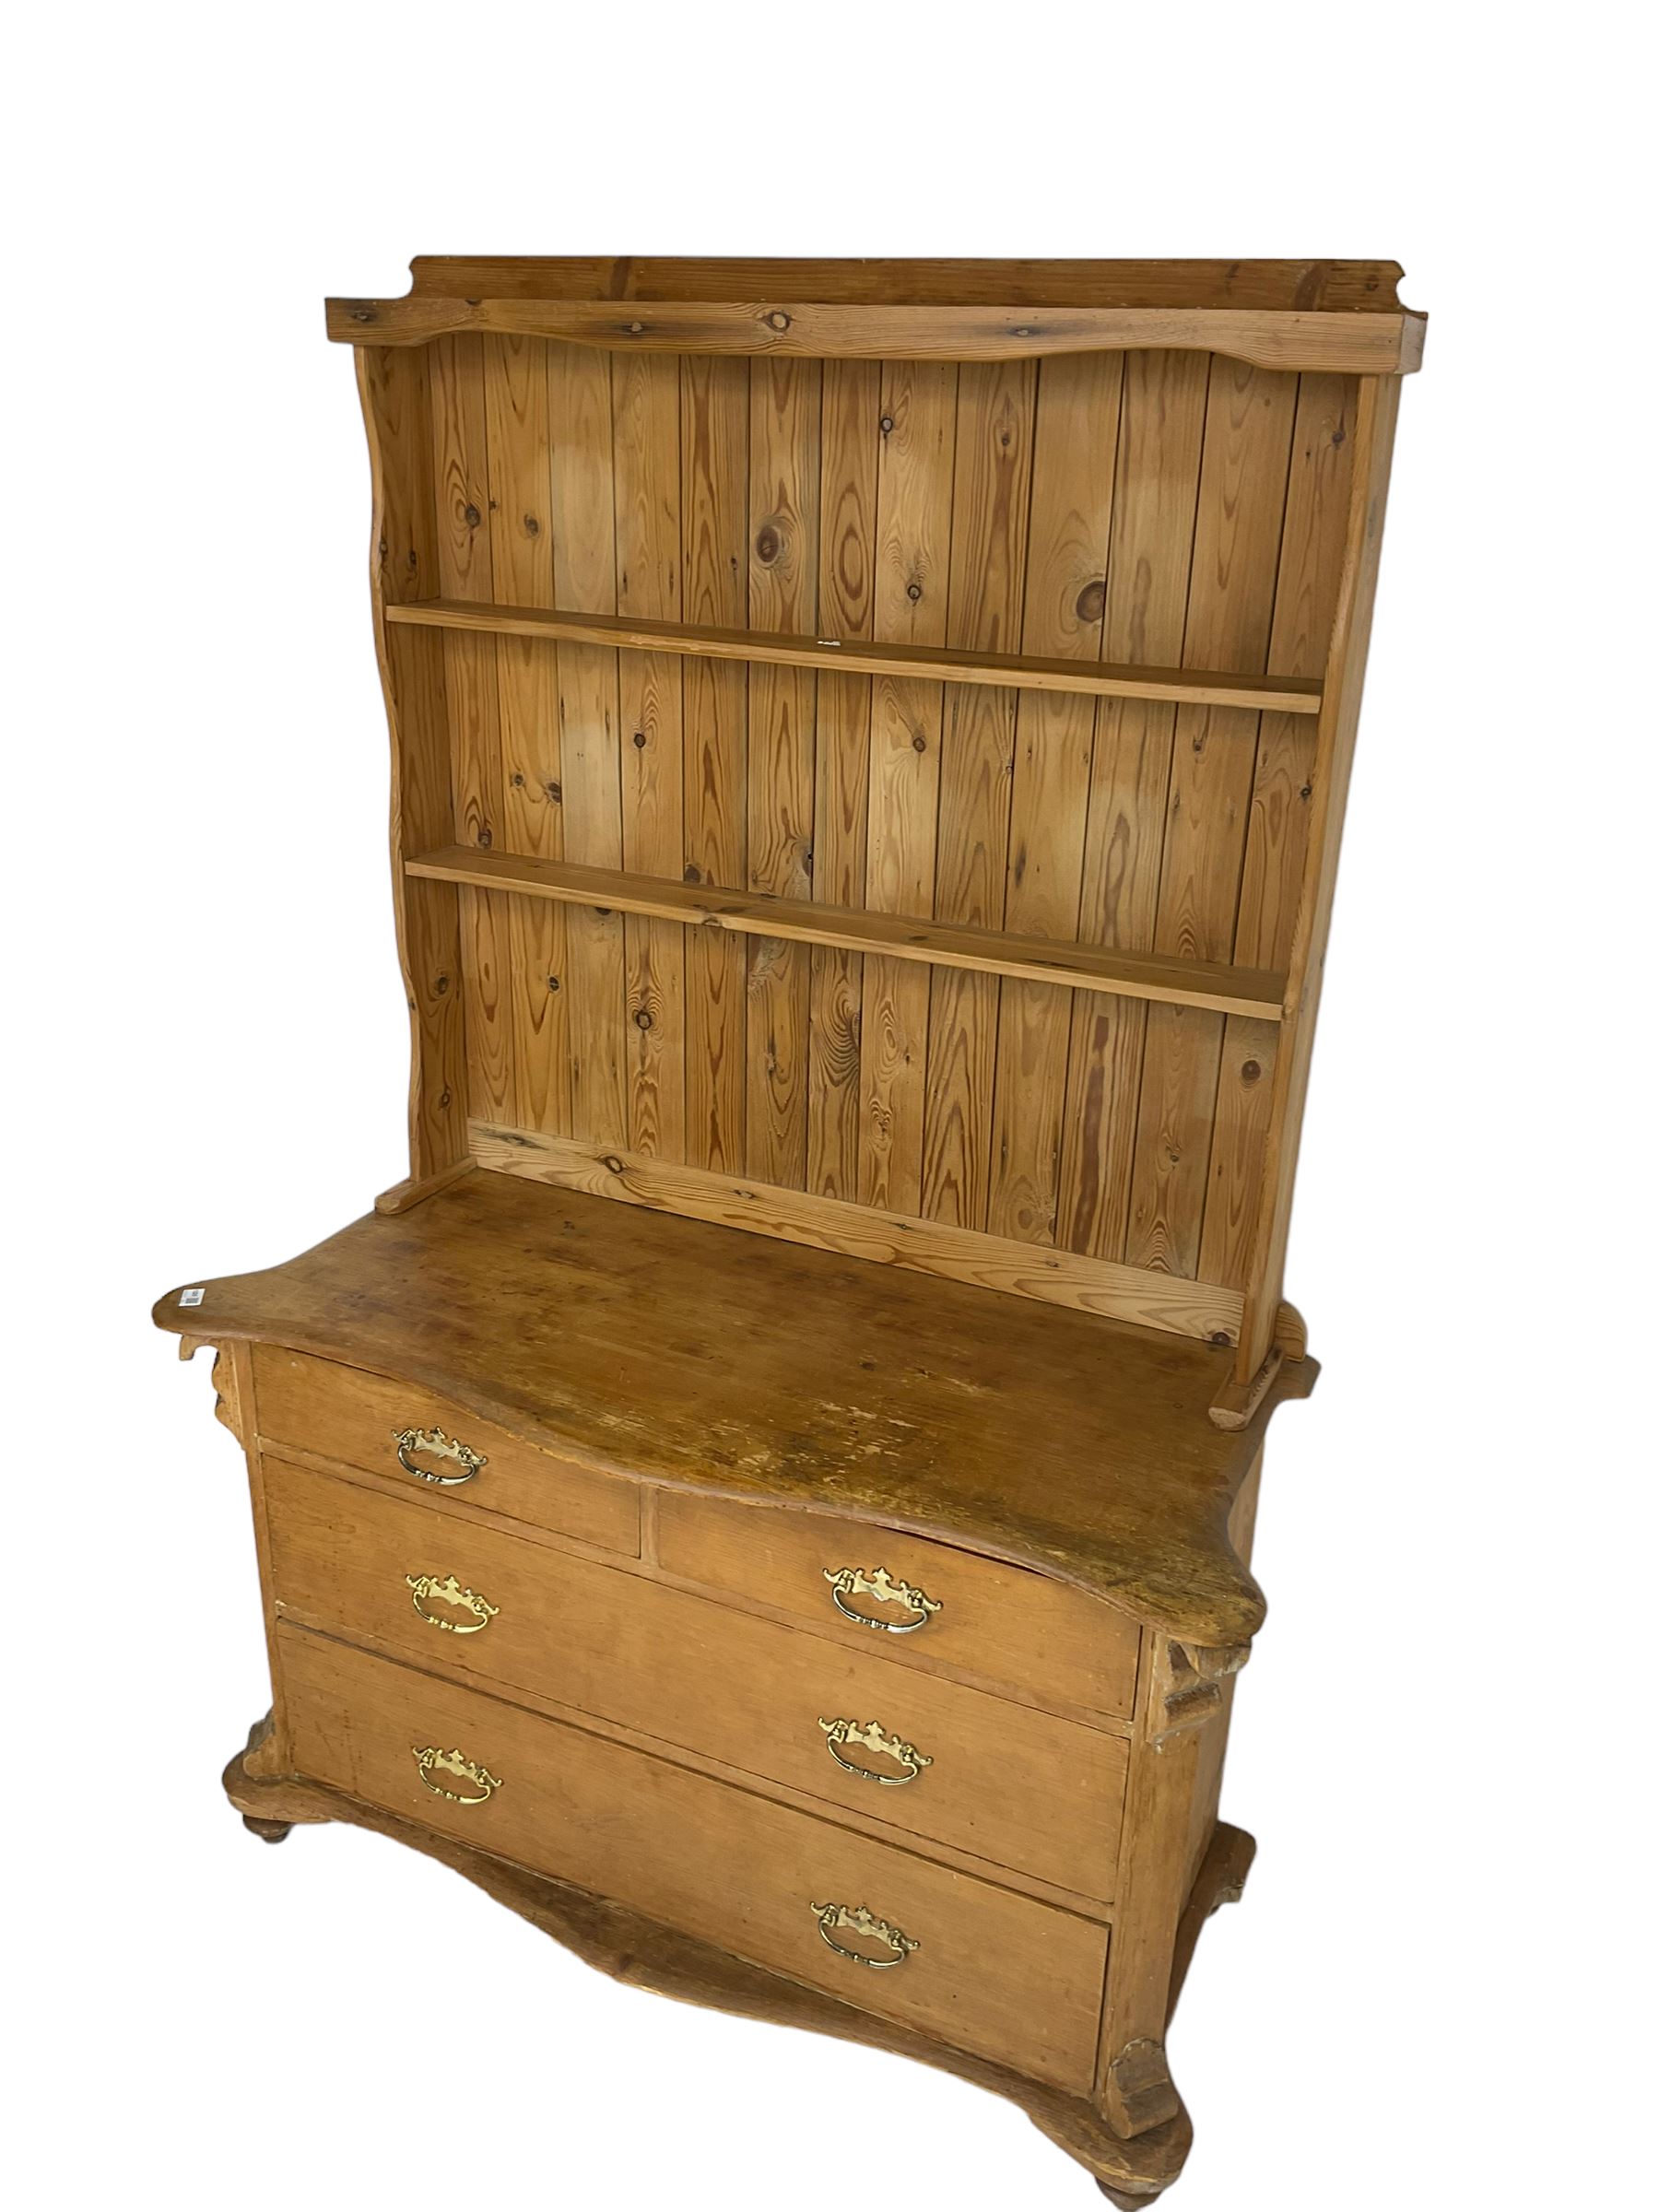 19th century and later pine farmhouse dresser - Image 8 of 8